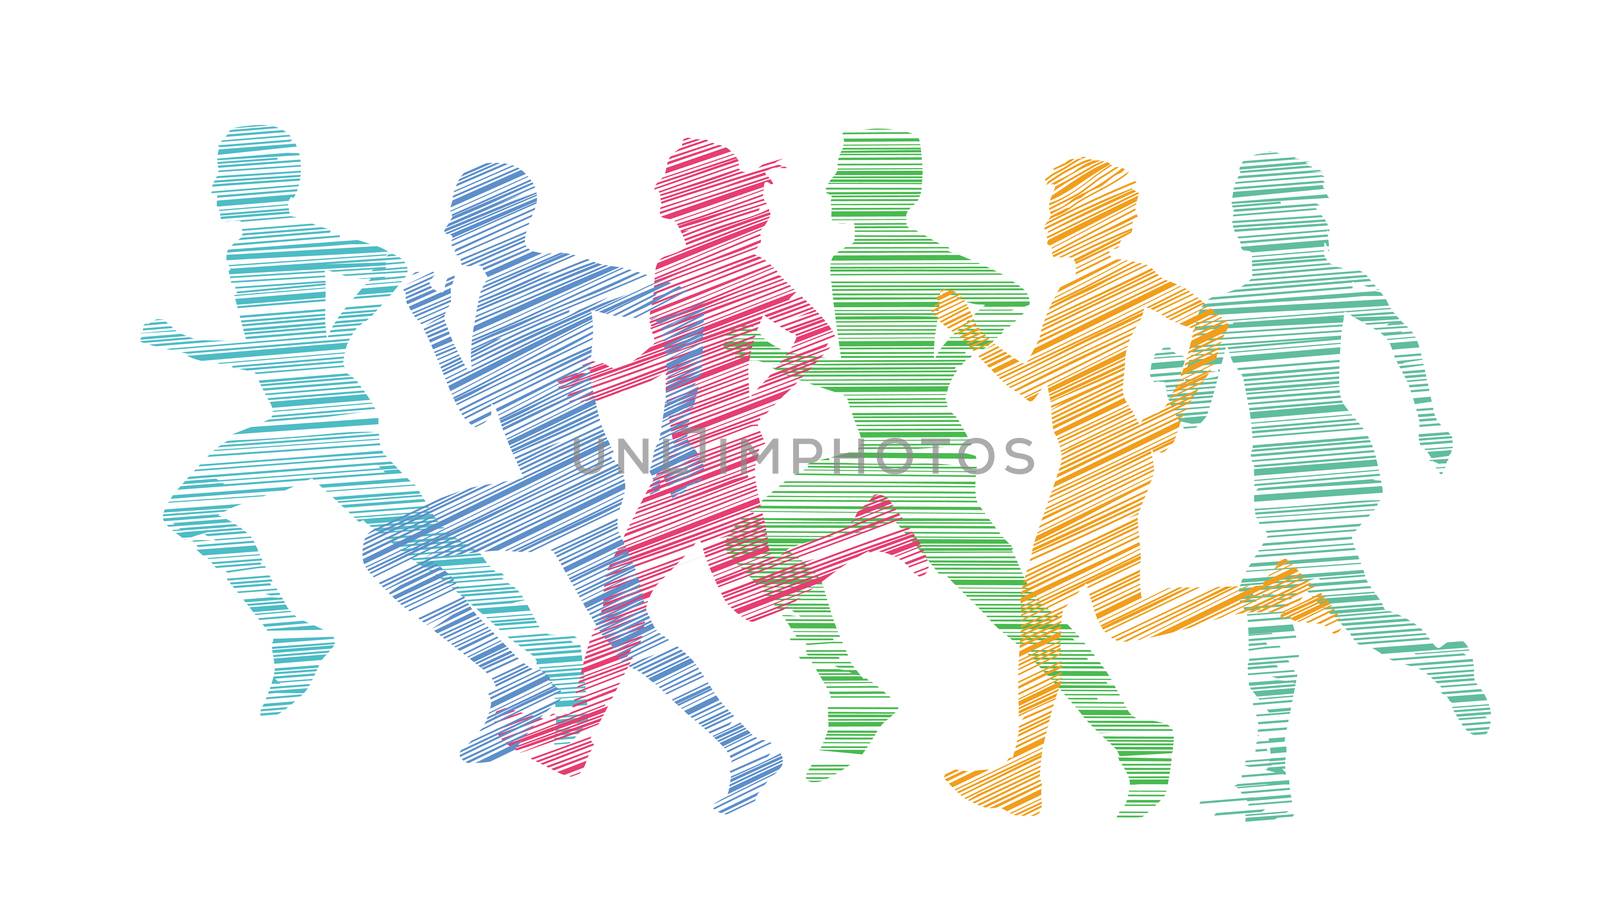 Running people doing sports